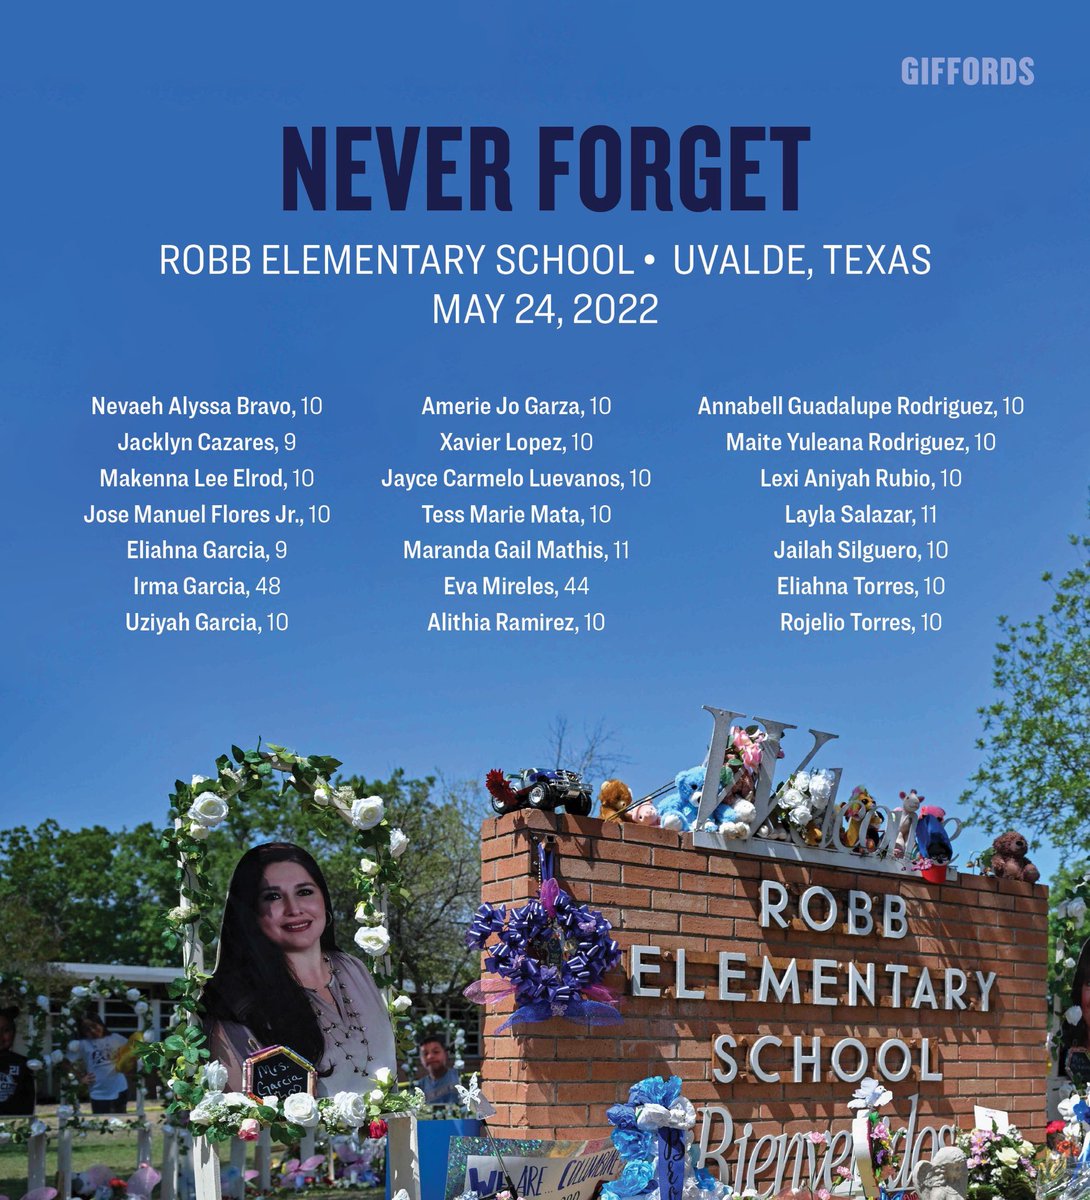 Holding space for the lives stolen 1 year ago today at Robb Elementary in Uvalde, TX. The 19 students & 2 teachers robbed of their futures, 17 people injured, & all those left to carry the burden of this trauma & grief. We can & we must create a safer world. #HonorWithAction